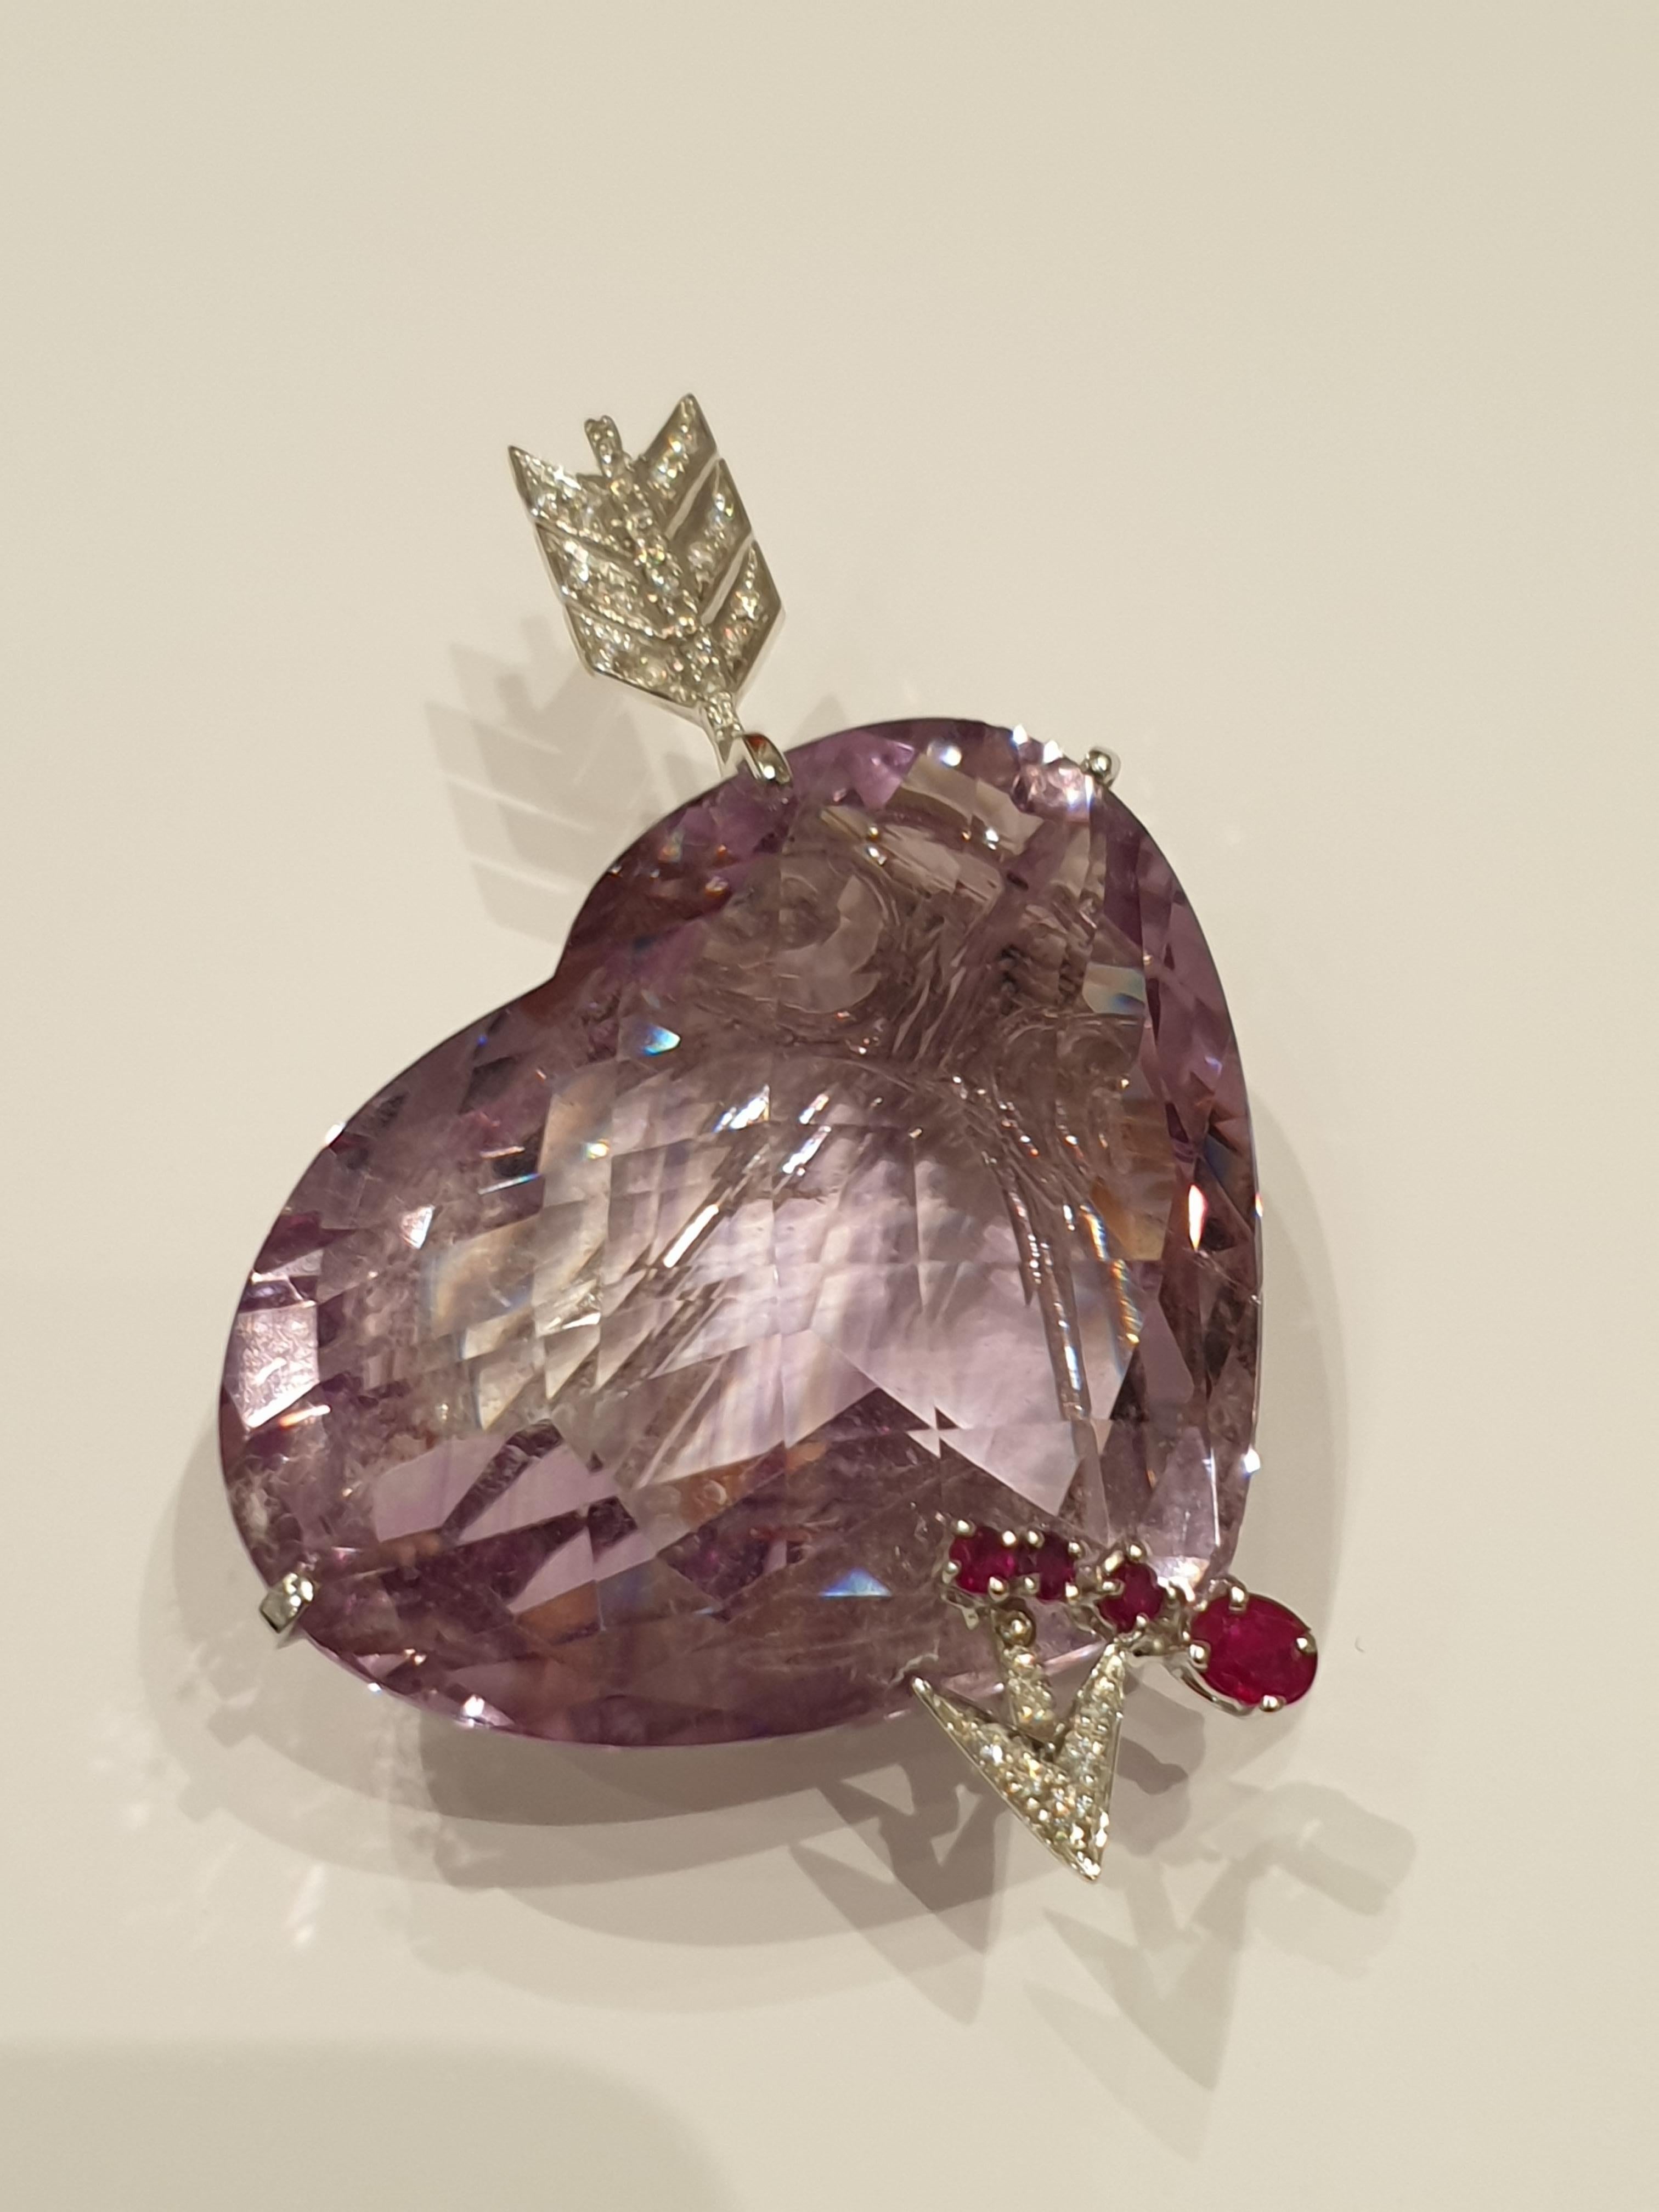 Heart shaped amethyst, untreated weighing 160 carats. 27 brillant-cut diamonds formed as an arrow, with a total weight of ca. 0.46 ct. Embellished with 4 rubies total weighing ca. 0,40 ct. Mounted in 18 K white gold. On the needle marked  with the